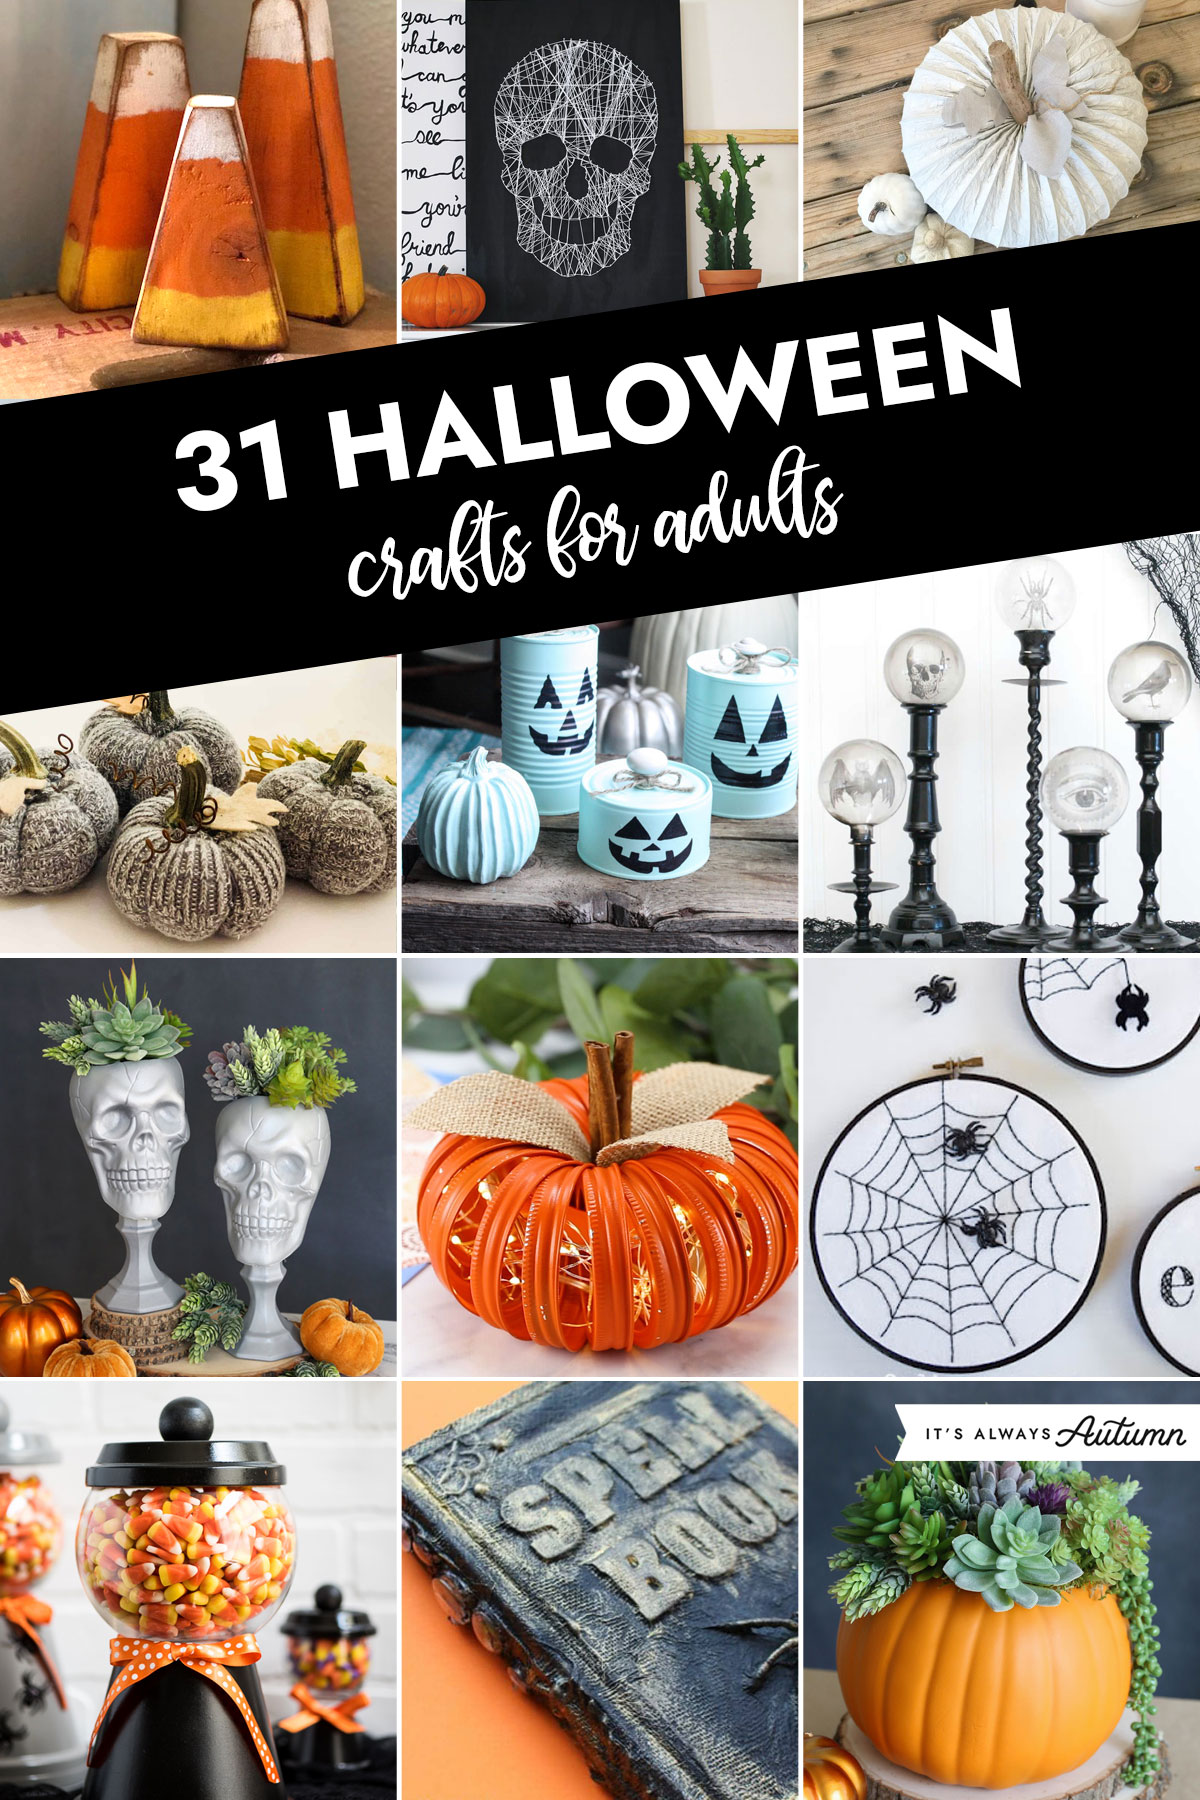 Halloween art projects: 10 amazing arts and crafts for Halloween